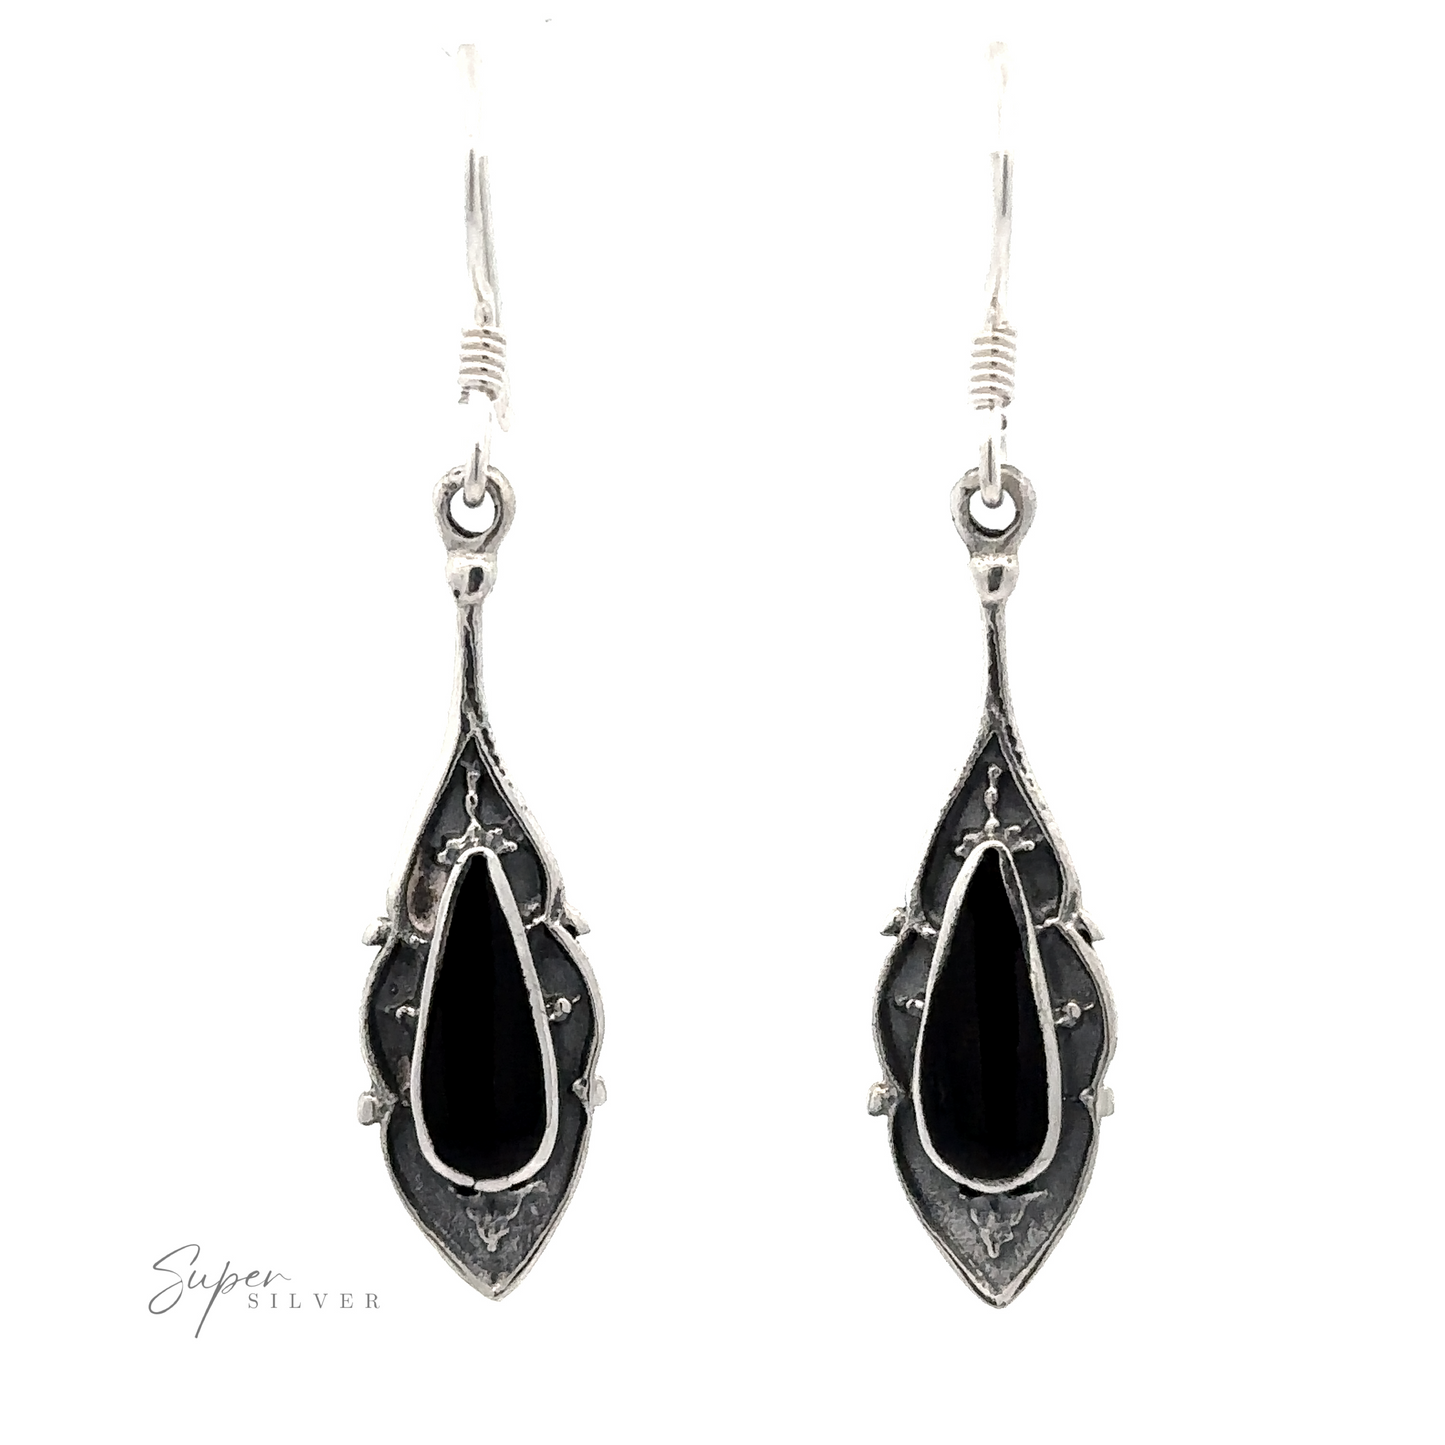 
                  
                    A pair of Teardrop Shape Inlaid Earrings with black teardrop-shaped stones. The brand name "Super Silver" is in the bottom left corner.
                  
                